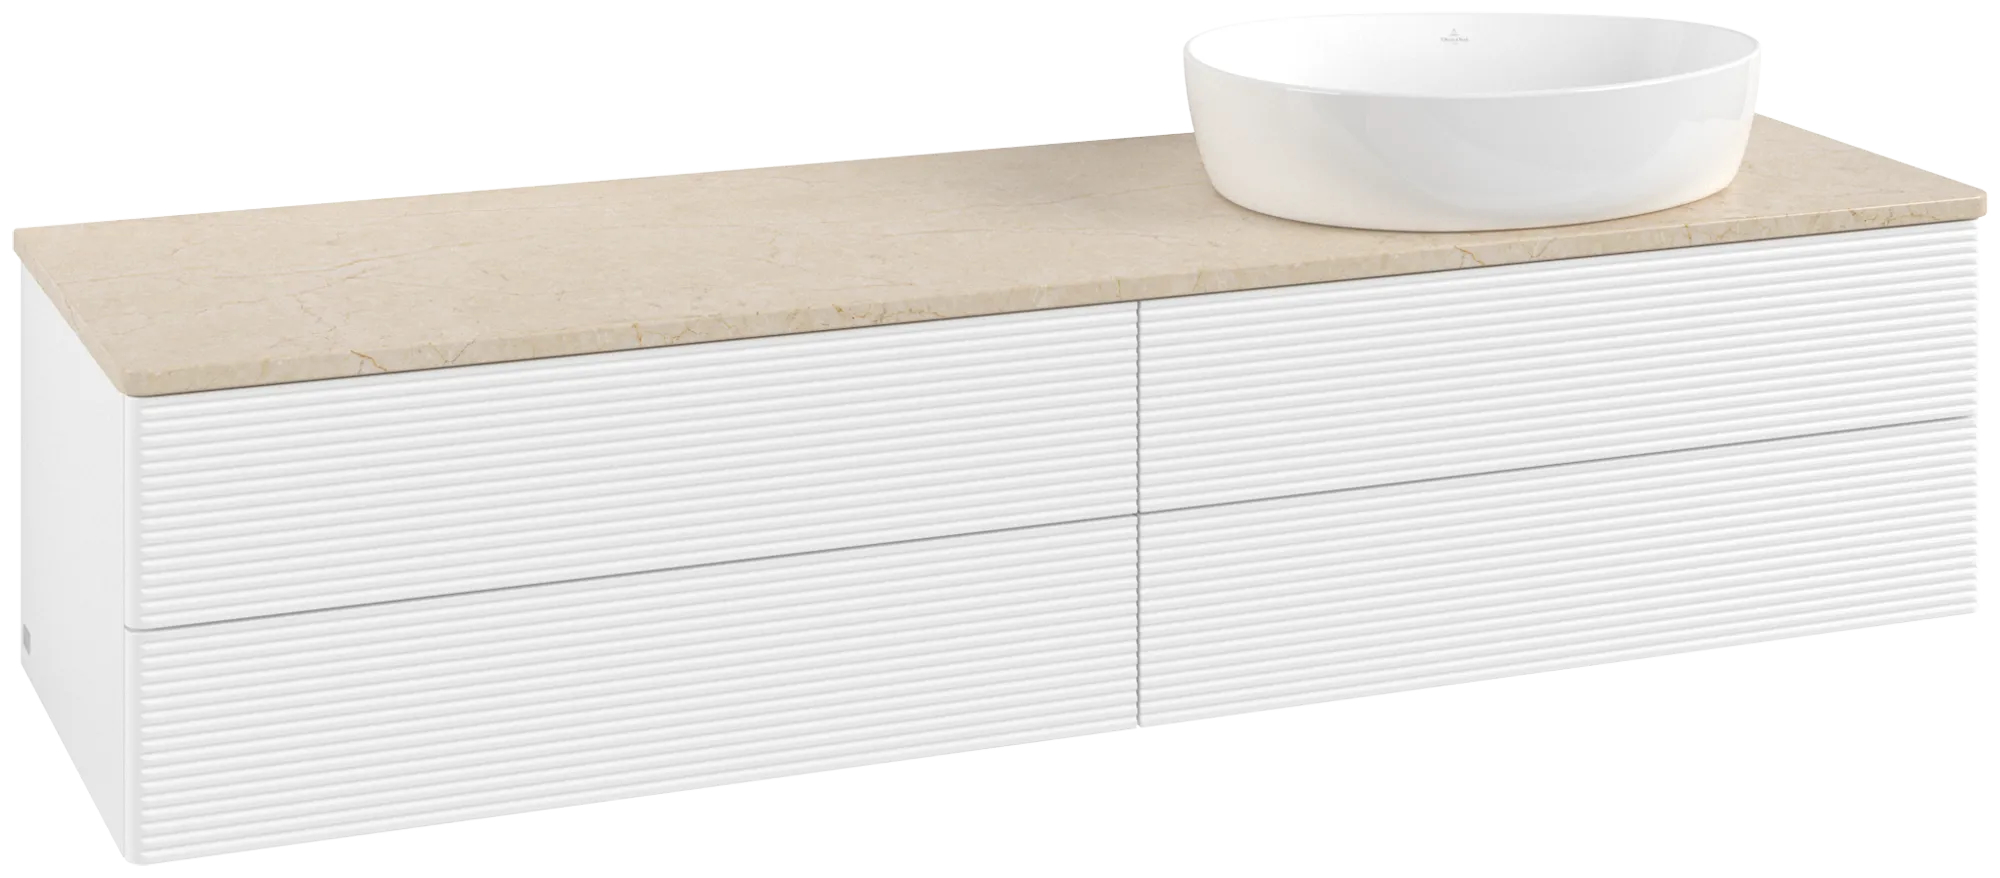 Picture of VILLEROY BOCH Antao Vanity unit, 4 pull-out compartments, 1600 x 360 x 500 mm, Front with grain texture, White Matt Lacquer / Botticino #K27113MT